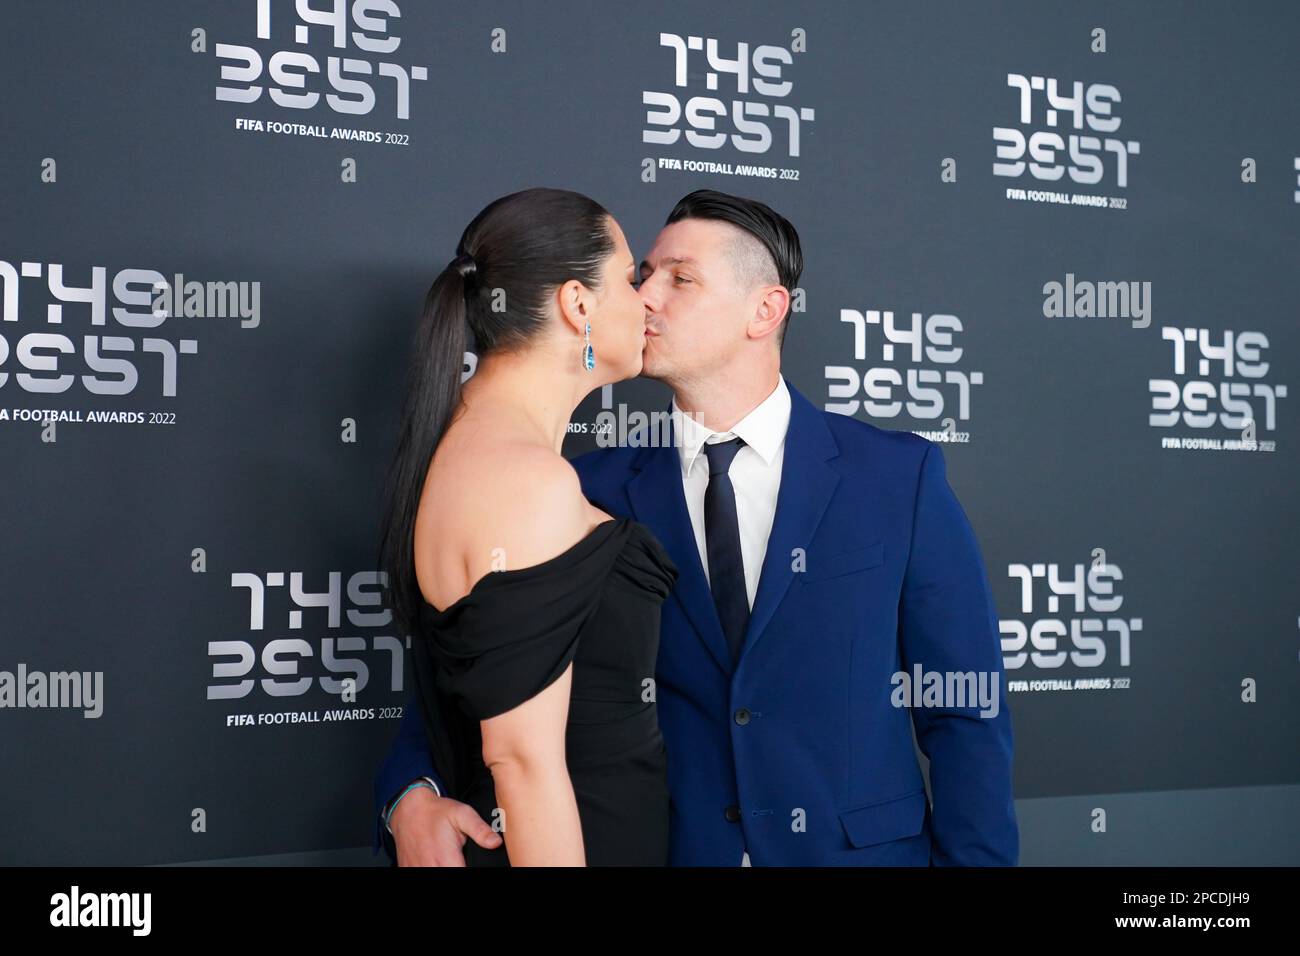 Paris, France. 27th Feb, 2023. Supermodel and Victoria's secret icon Adriana Lima kisses boyfriend Andre Lemmers on the green carpet at arrival during the The Best FIFA Football Awards 2022 at Salle Pleyel in Paris, France. (Foto: Daniela Porcelli/Sports Press Photo/C - ONE HOUR DEADLINE - ONLY ACTIVATE FTP IF IMAGES LESS THAN ONE HOUR OLD - Alamy) Credit: SPP Sport Press Photo. /Alamy Live News Stock Photo